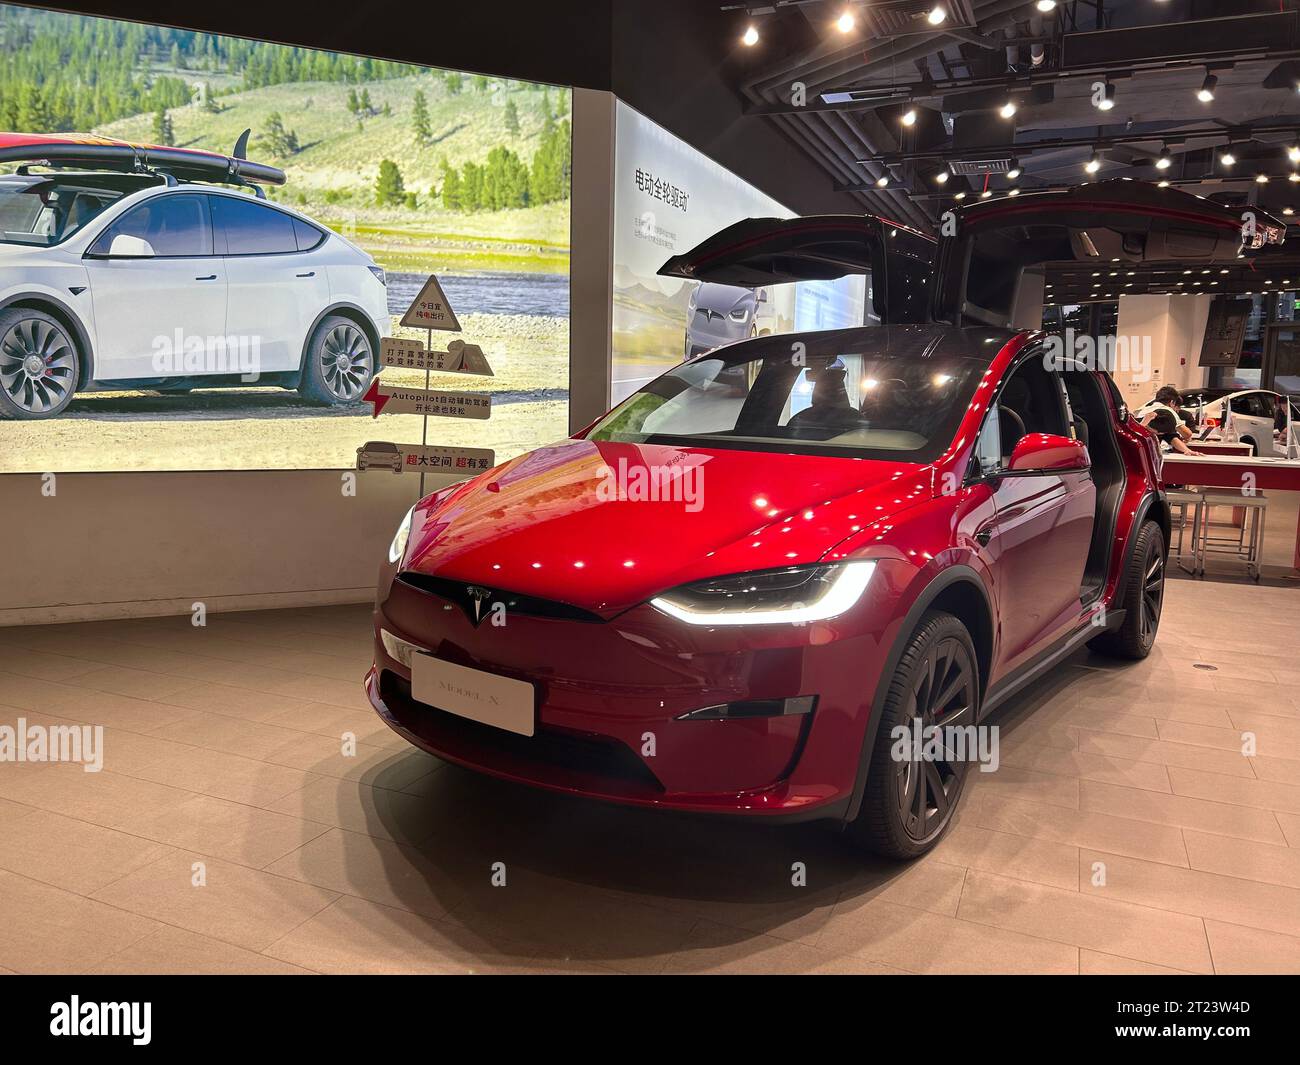 https://c8.alamy.com/comp/2T23W4D/shanghai-china-new-tesla-electric-car-on-display-in-chinese-new-car-showroom-model-x-2T23W4D.jpg